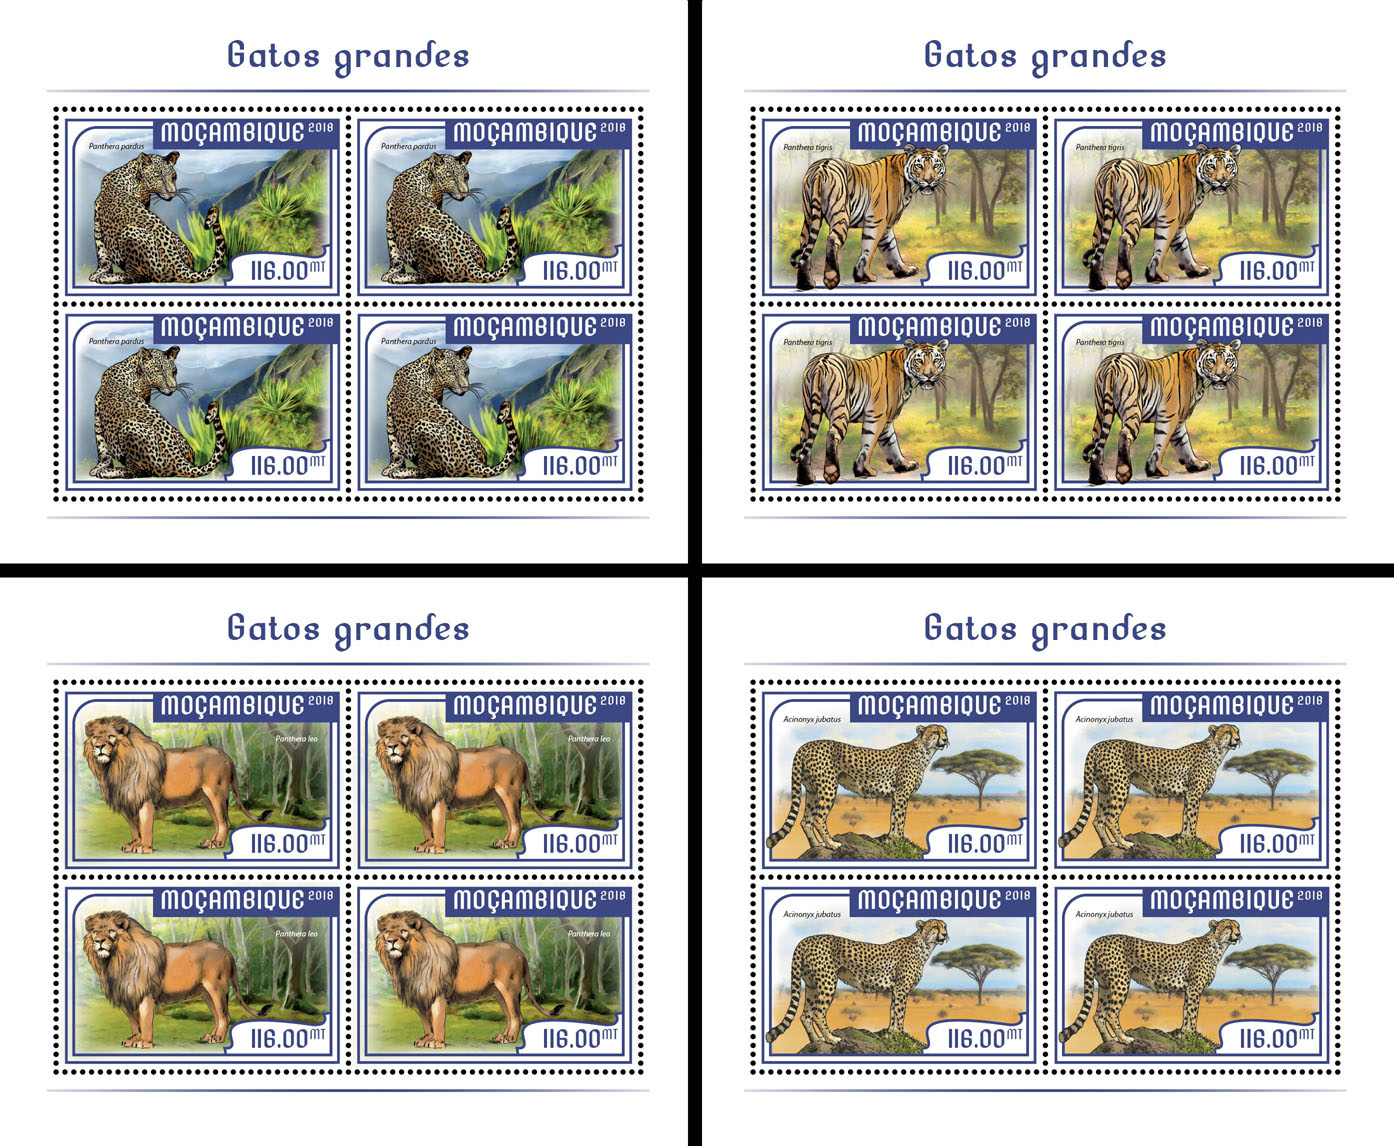 Big cats (4 sets of 4 stamps) - Issue of Mozambique postage Stamps